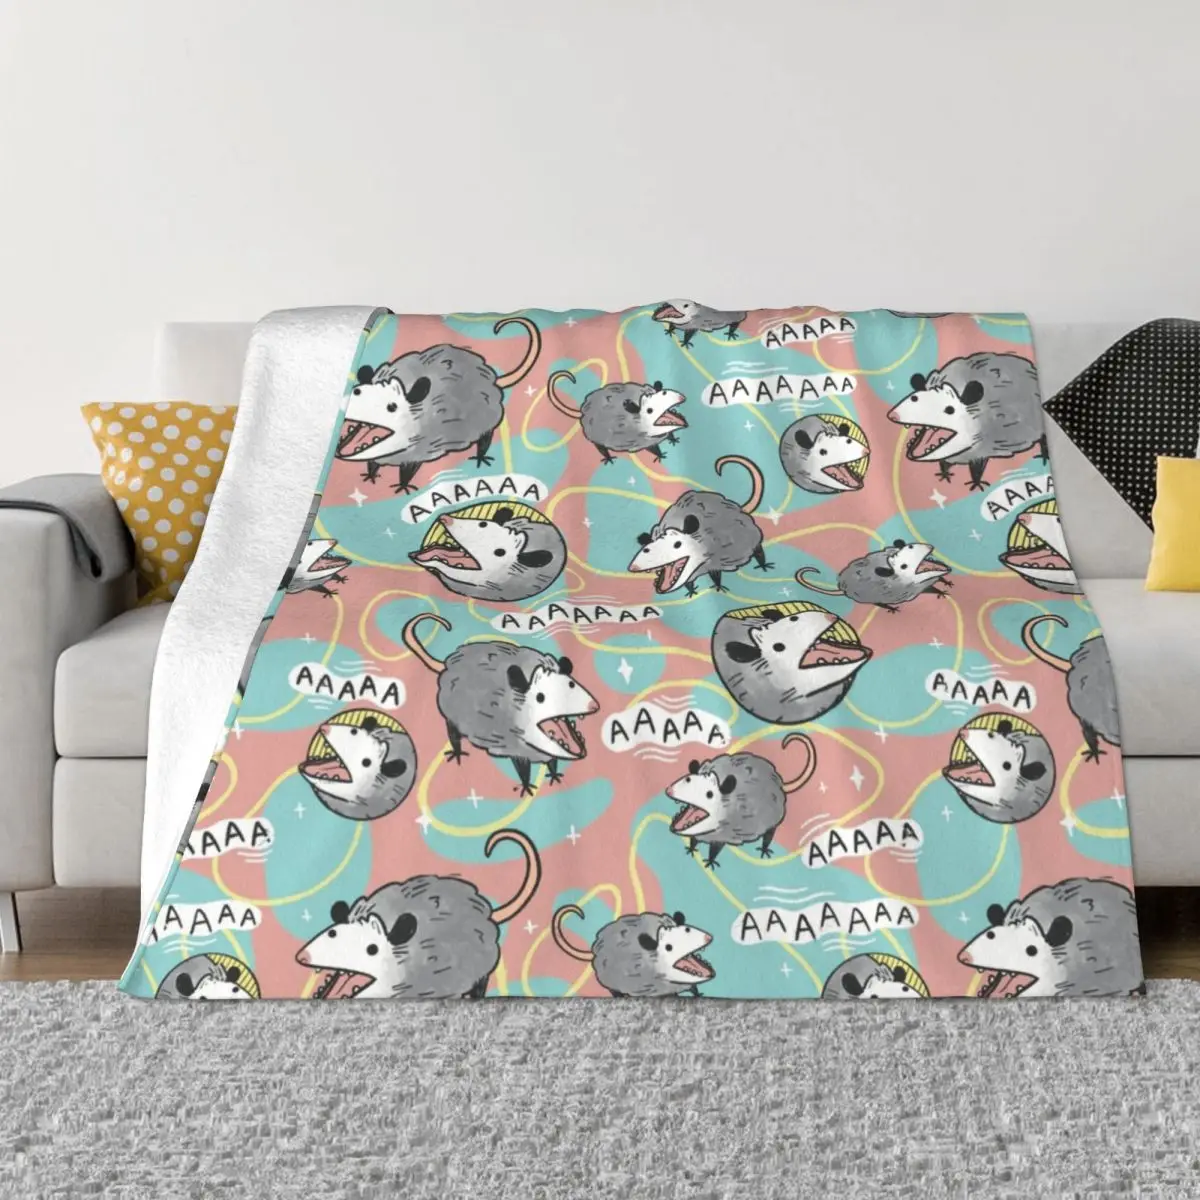 

Opossum Cartoon Plaid Blankets Sofa Cover Flannel Textile Decor Animal Collage Gift Throw Blanket for Bed Couch Bedding Throws